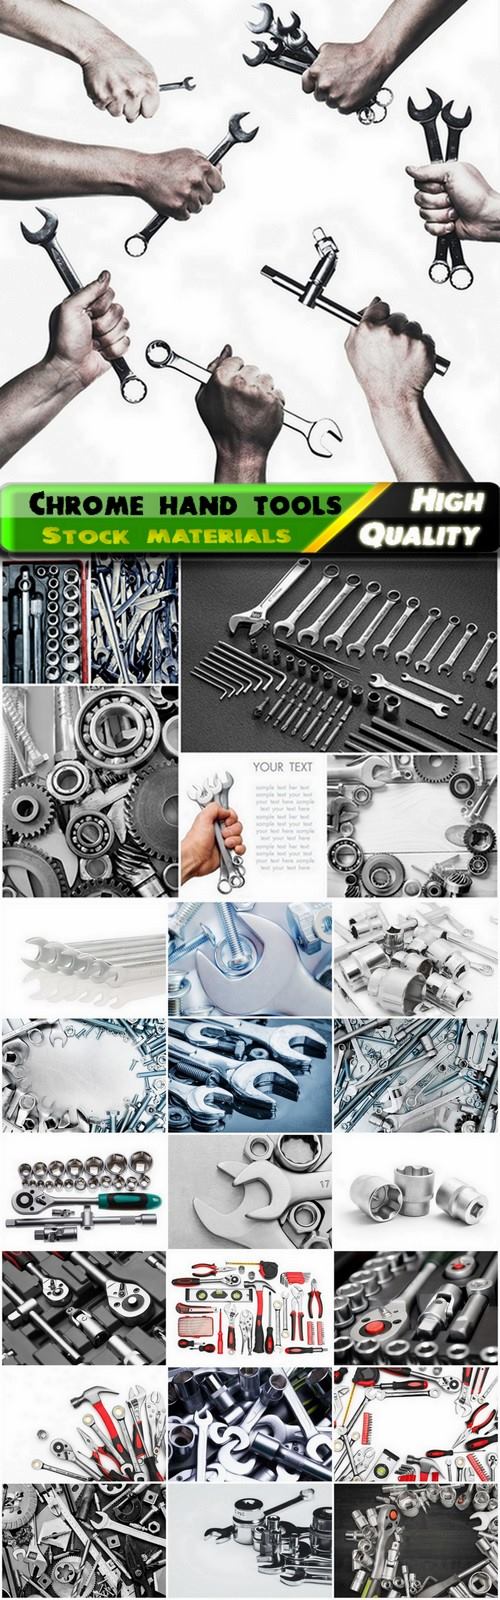 Chrome hand tools wrenches and bolts - 25 HQ Jpg